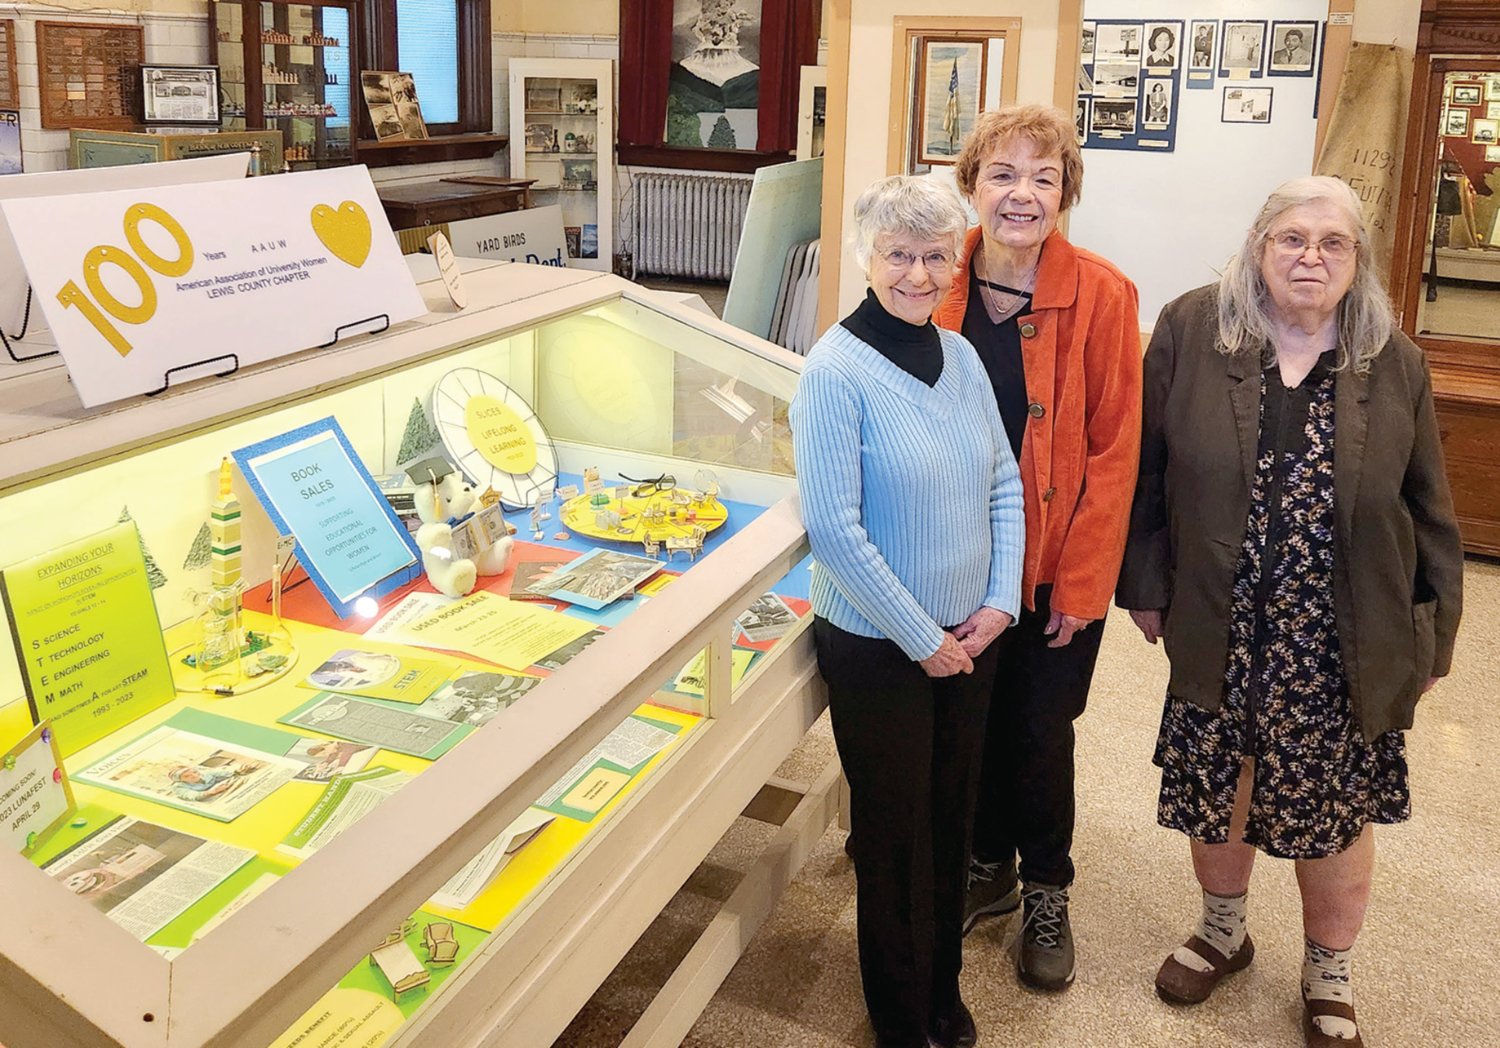 From left, Priscilla Tiller, Jan Leth and Luana Graves pose for a photo at the Lewis County Historical Museum.